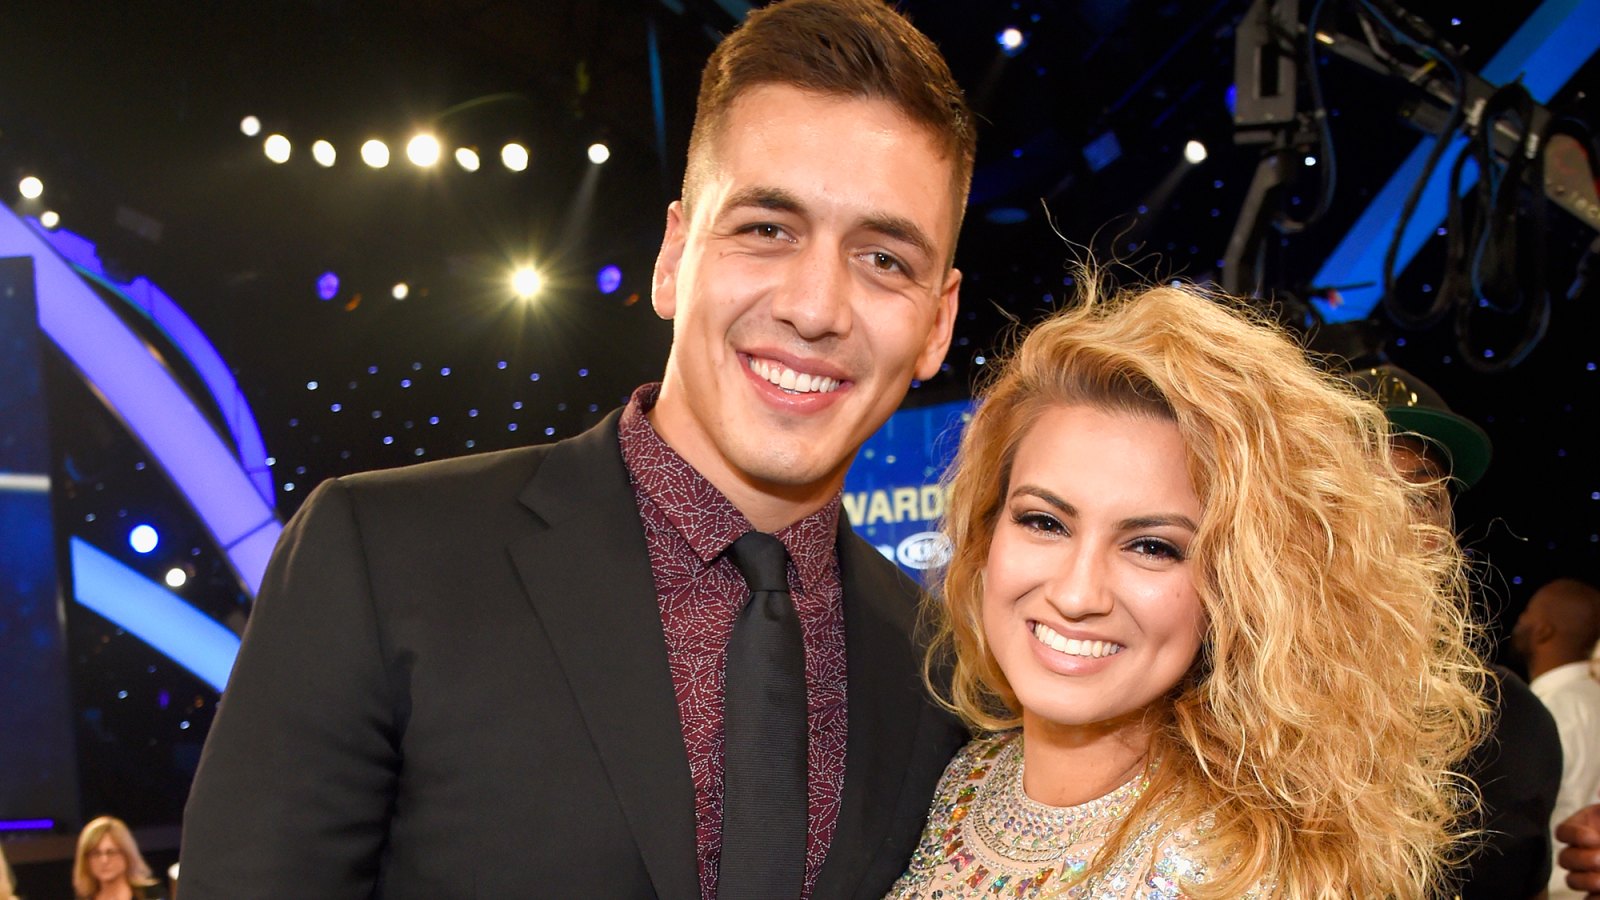 André Murillo and Tori Kelly